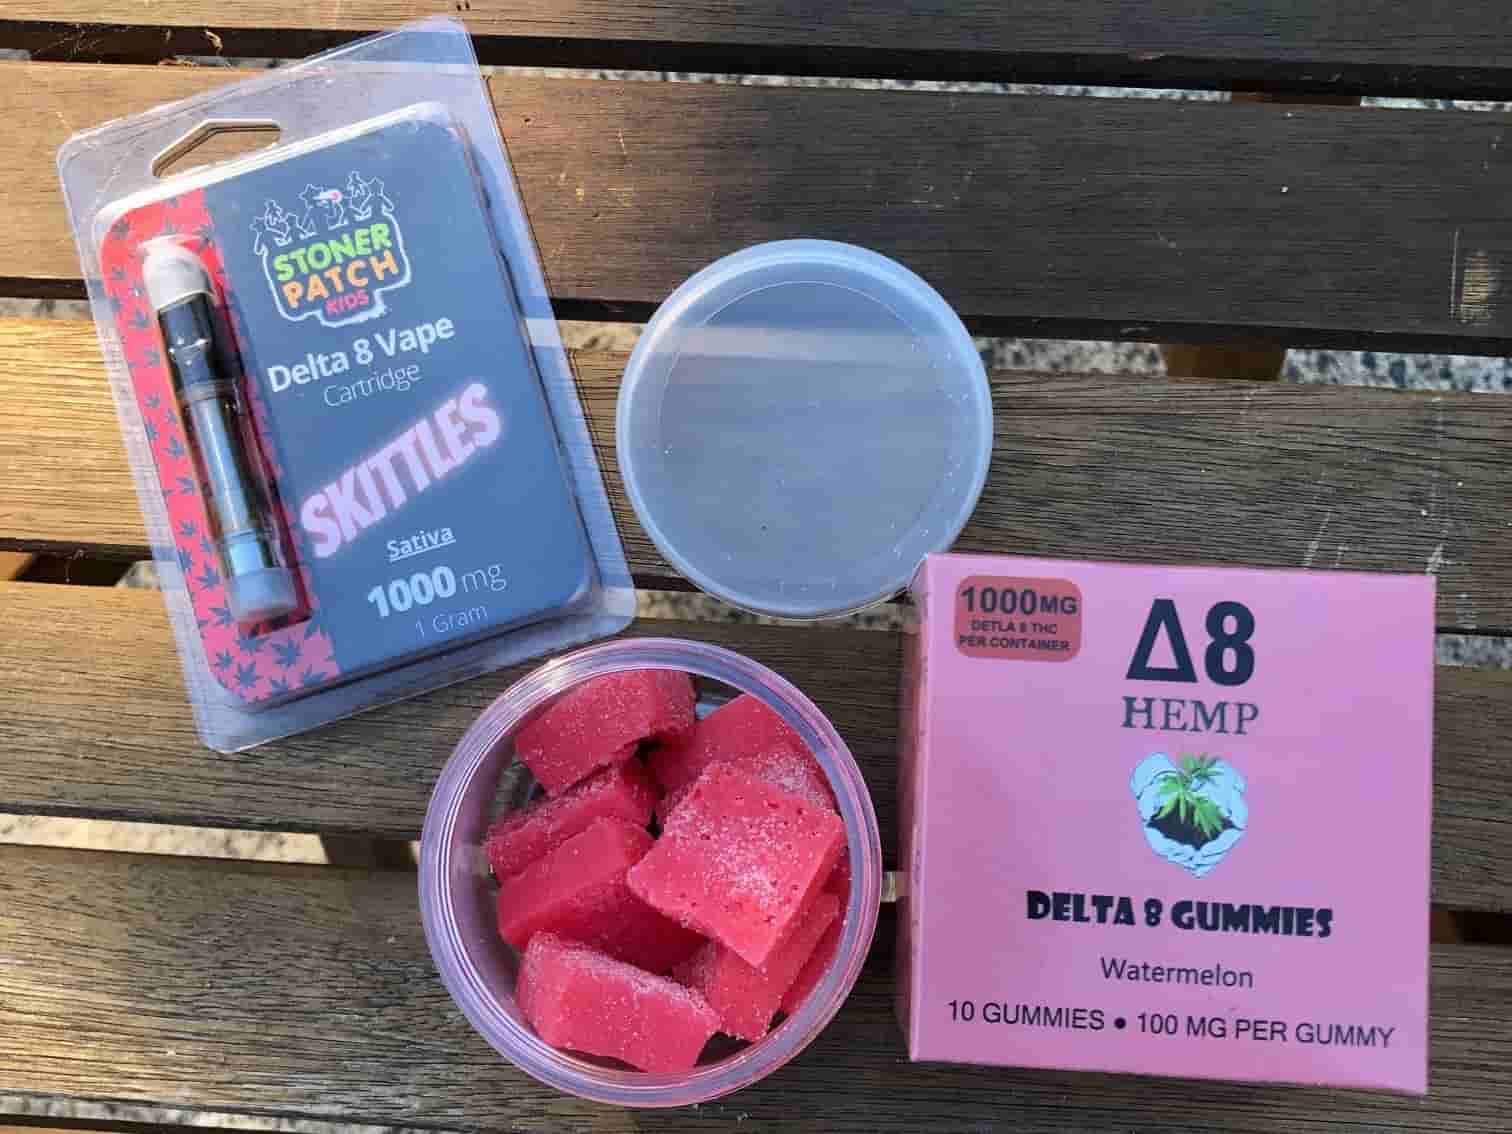 DELTA 8 IS IT WEED - Gummies|Thc|Products|Hemp|Product|Brand|Effects|Delta|Gummy|Cbd|Origin|Quality|Dosage|Delta-8|Dose|Usasource|Flavors|Brands|Ingredients|Range|Customers|Edibles|Cartridges|Reviews|Side|List|Health|Cannabis|Lab|Customer|Options|Benefits|Overviewproducts|Research|Time|Market|Drug|Farms|Party|People|Delta-8 Thc|Delta-8 Products|Delta-9 Thc|Delta-8 Gummies|Delta-8 Thc Products|Delta-8 Brands|Customer Reviews|Brand Overviewproducts|Drug Tests|Free Shipping|Similar Benefits|Vape Cartridges|Hemp Doctor|United States|Third Party Lab|Drug Test|Thc Edibles|Health Canada|Cannabis Plant|Side Effects|Organic Hemp|Diamond Cbd|Reaction Time|Legal Hemp|Psychoactive Effects|Psychoactive Properties|Third Party|Dry Eyes|Delta-8 Market|Tolerance Level